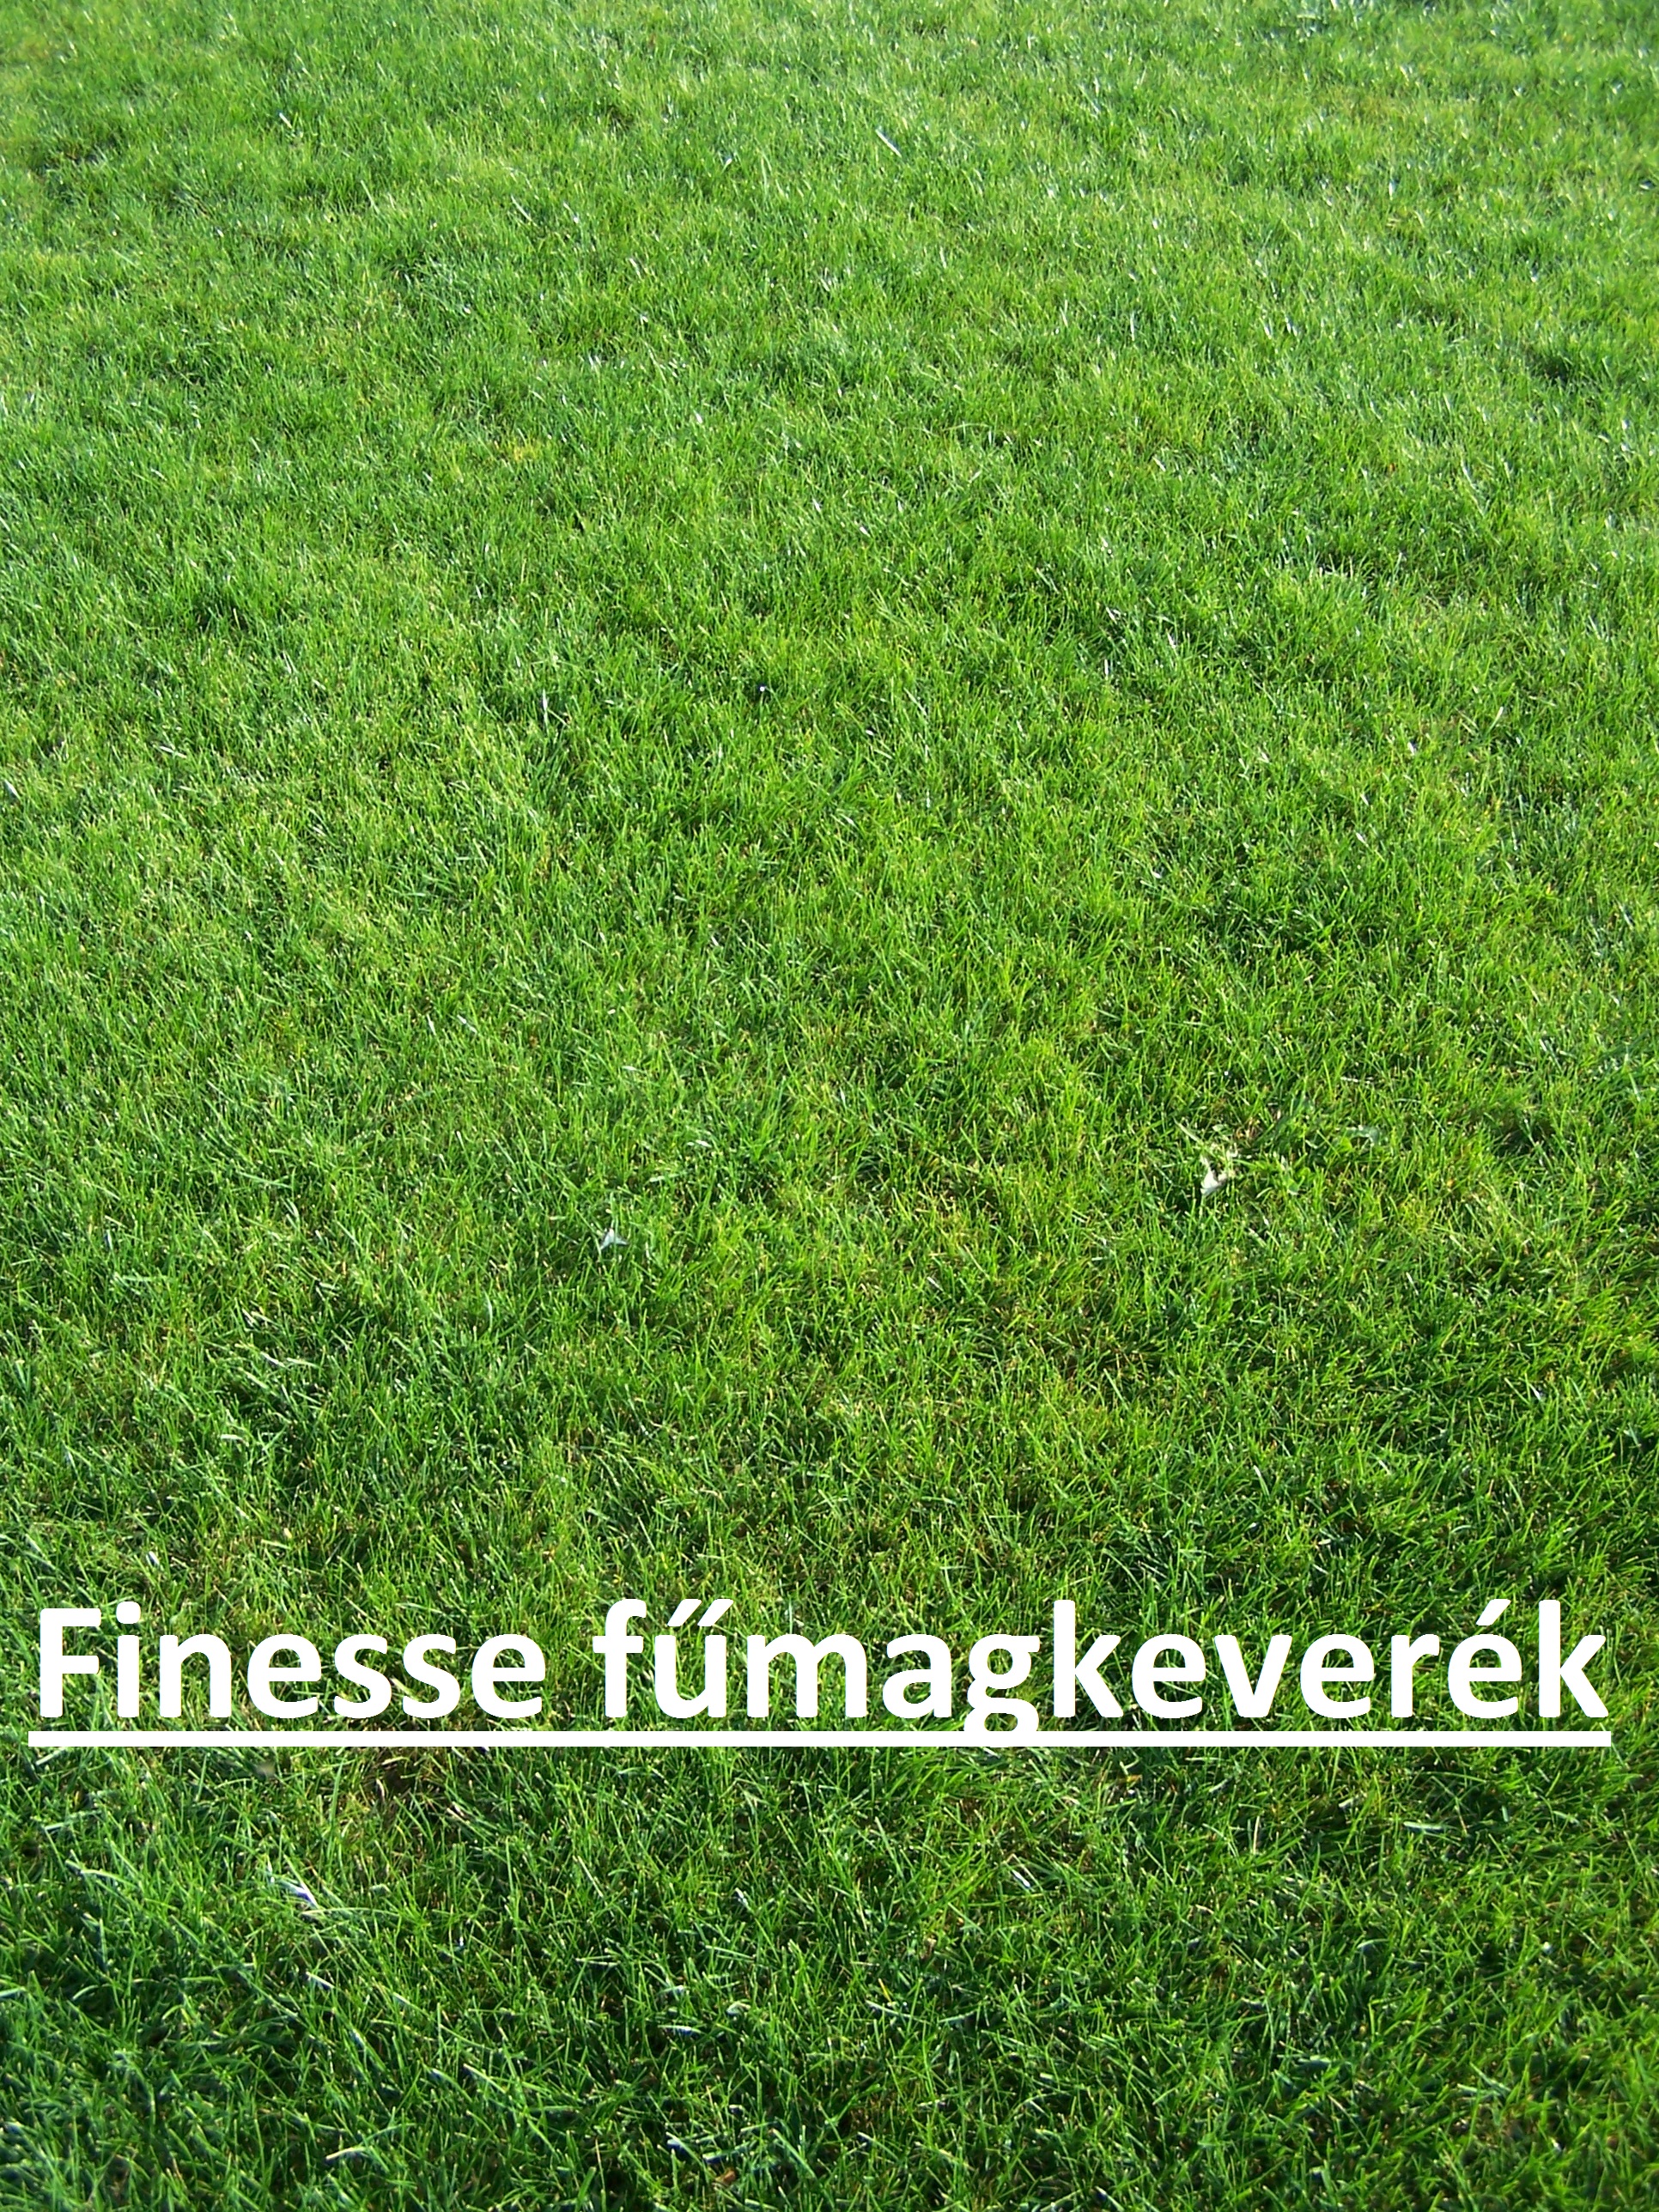 ICL grass seed Finesse (lawn type) 10 kg